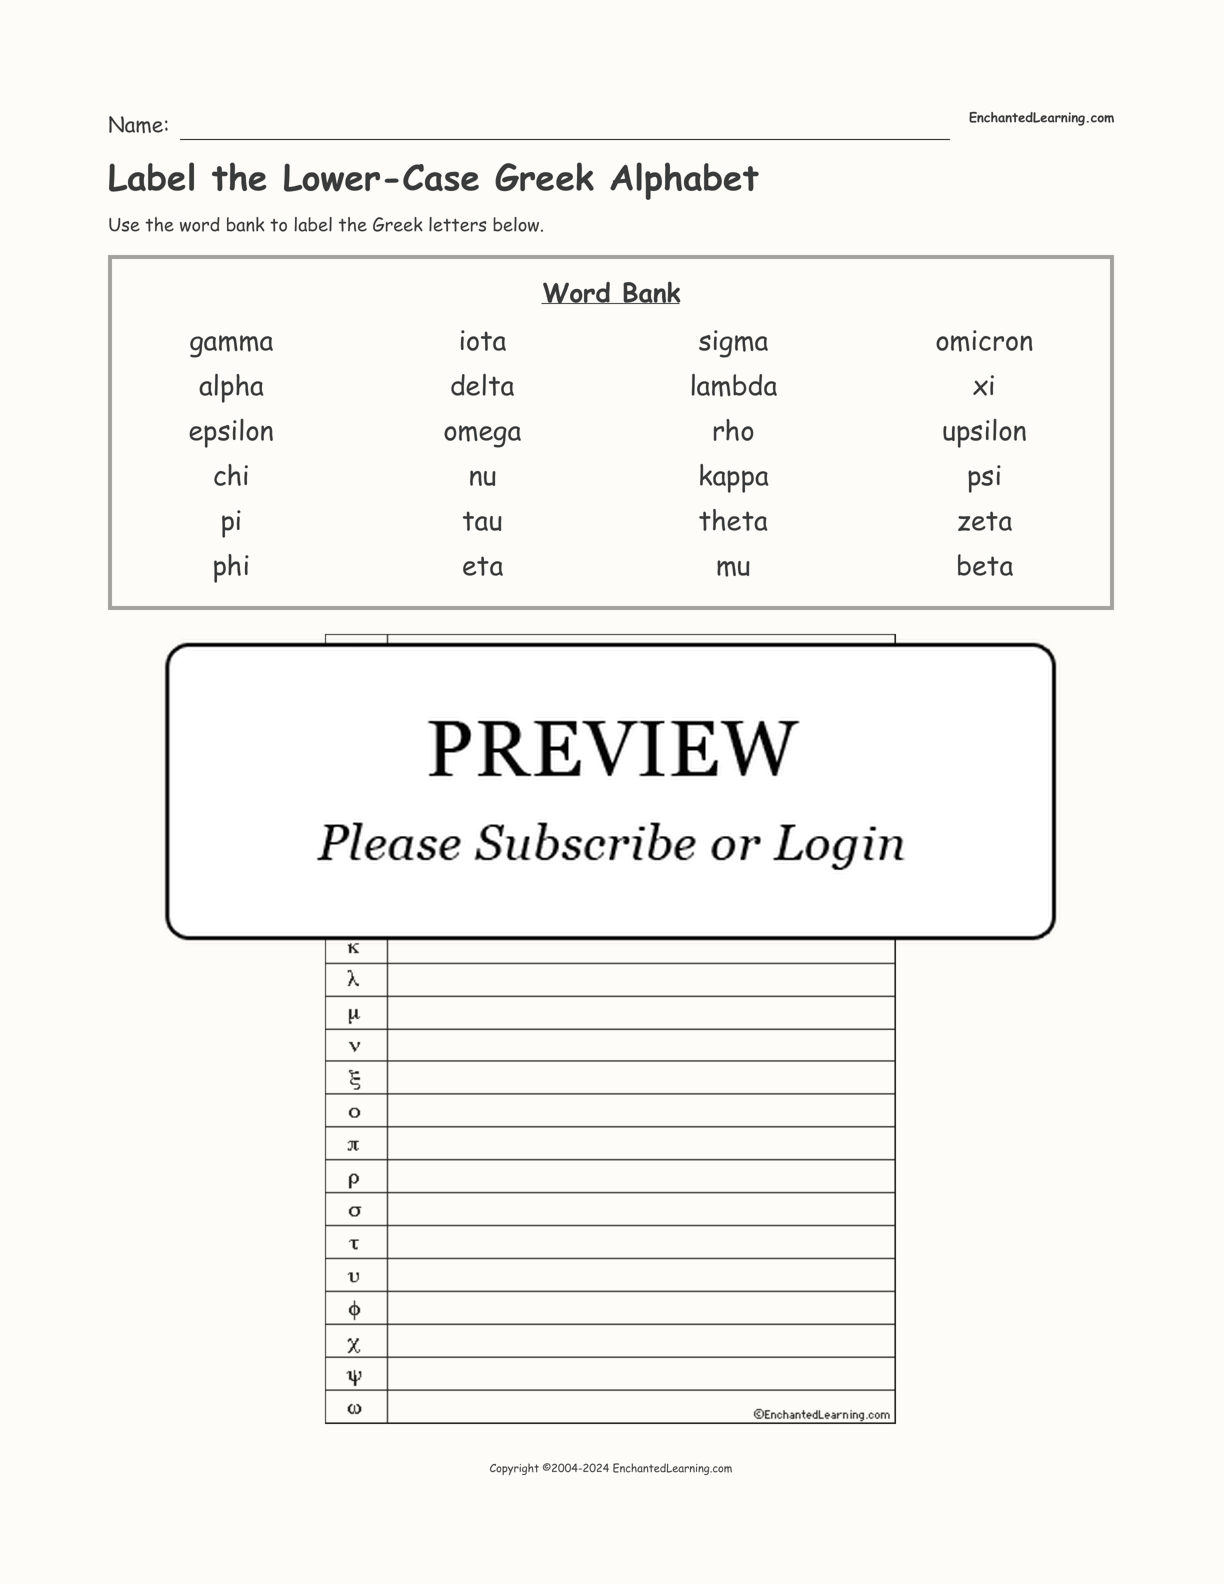 Label the Lower-Case Greek Alphabet interactive worksheet page 1